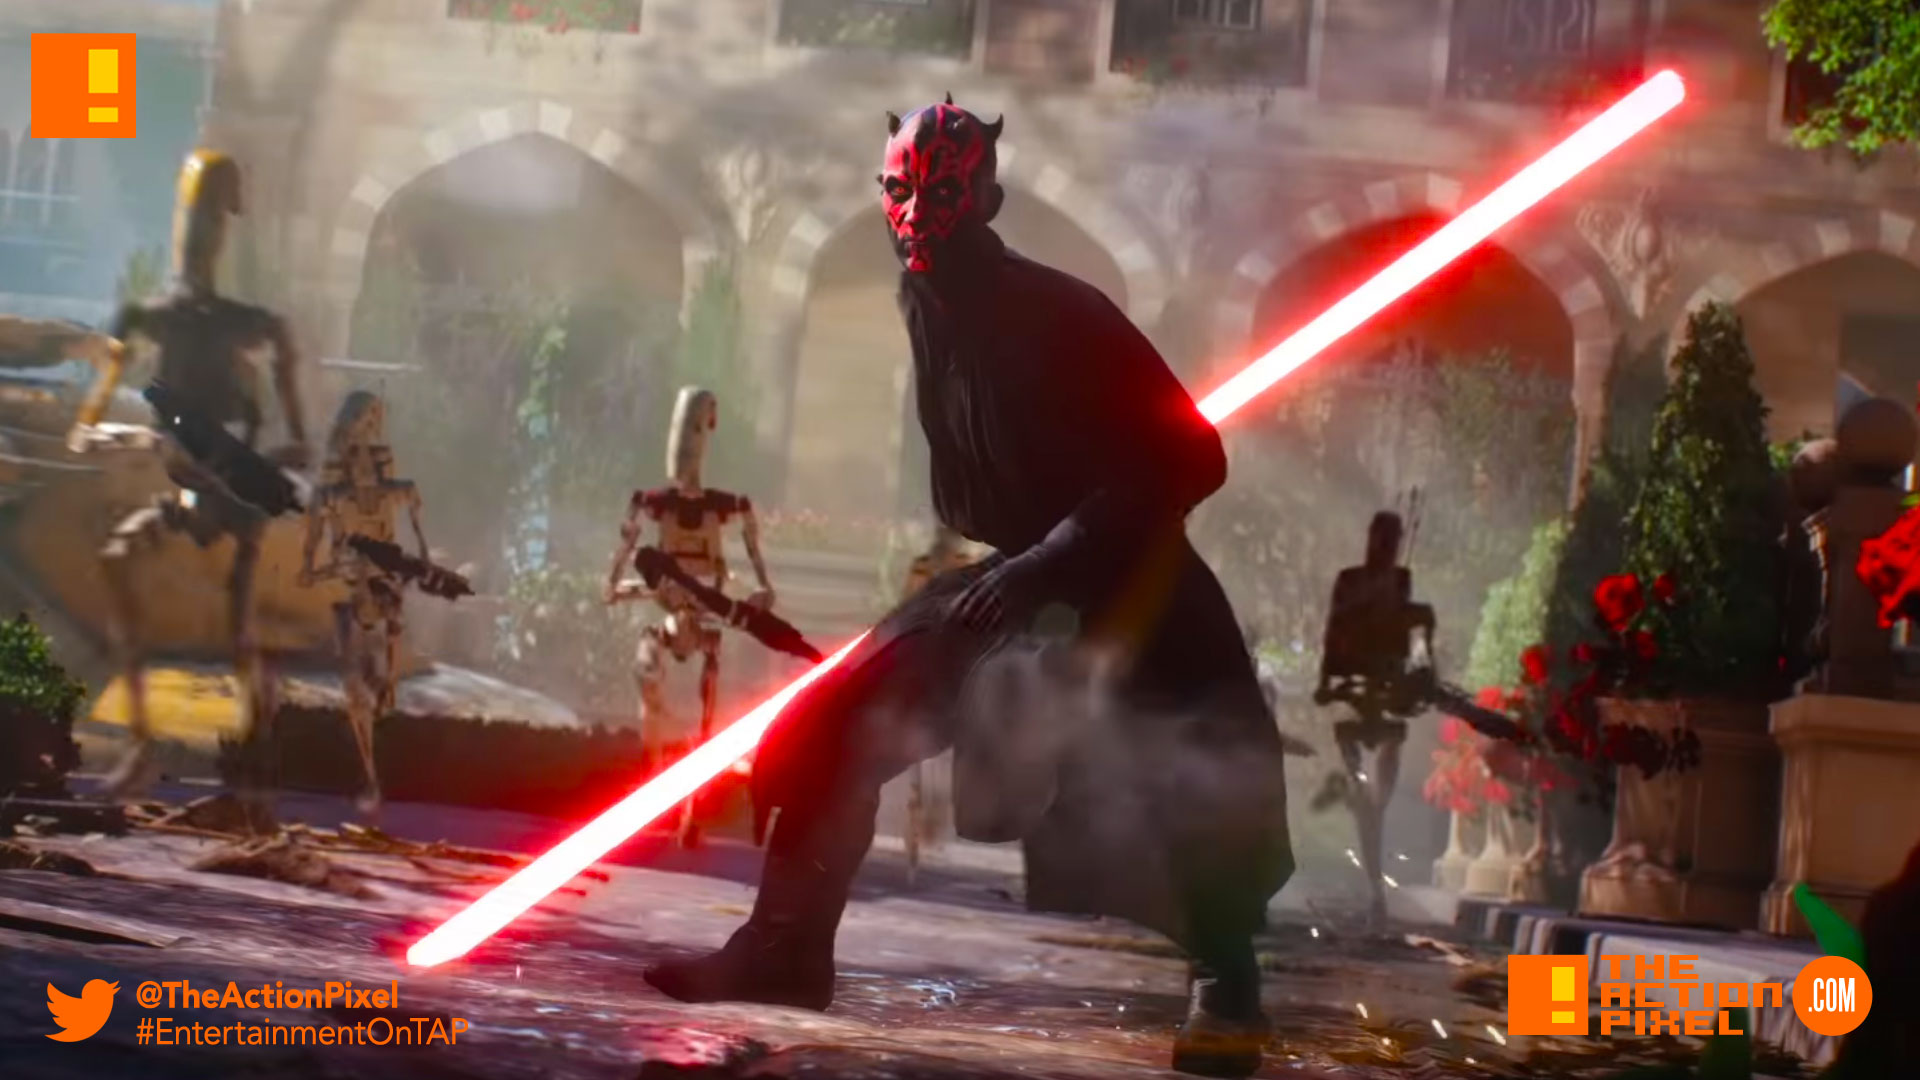 darth maul, battlefront II, star wars battlefront II,star wars battlefront,star wars, ea , electronic arts, gameplay trailer,trailer, ea, dice, storm troopers,battle droids,droids, lightsaber, the force, the dark side, the action pixel,entertainment on tap